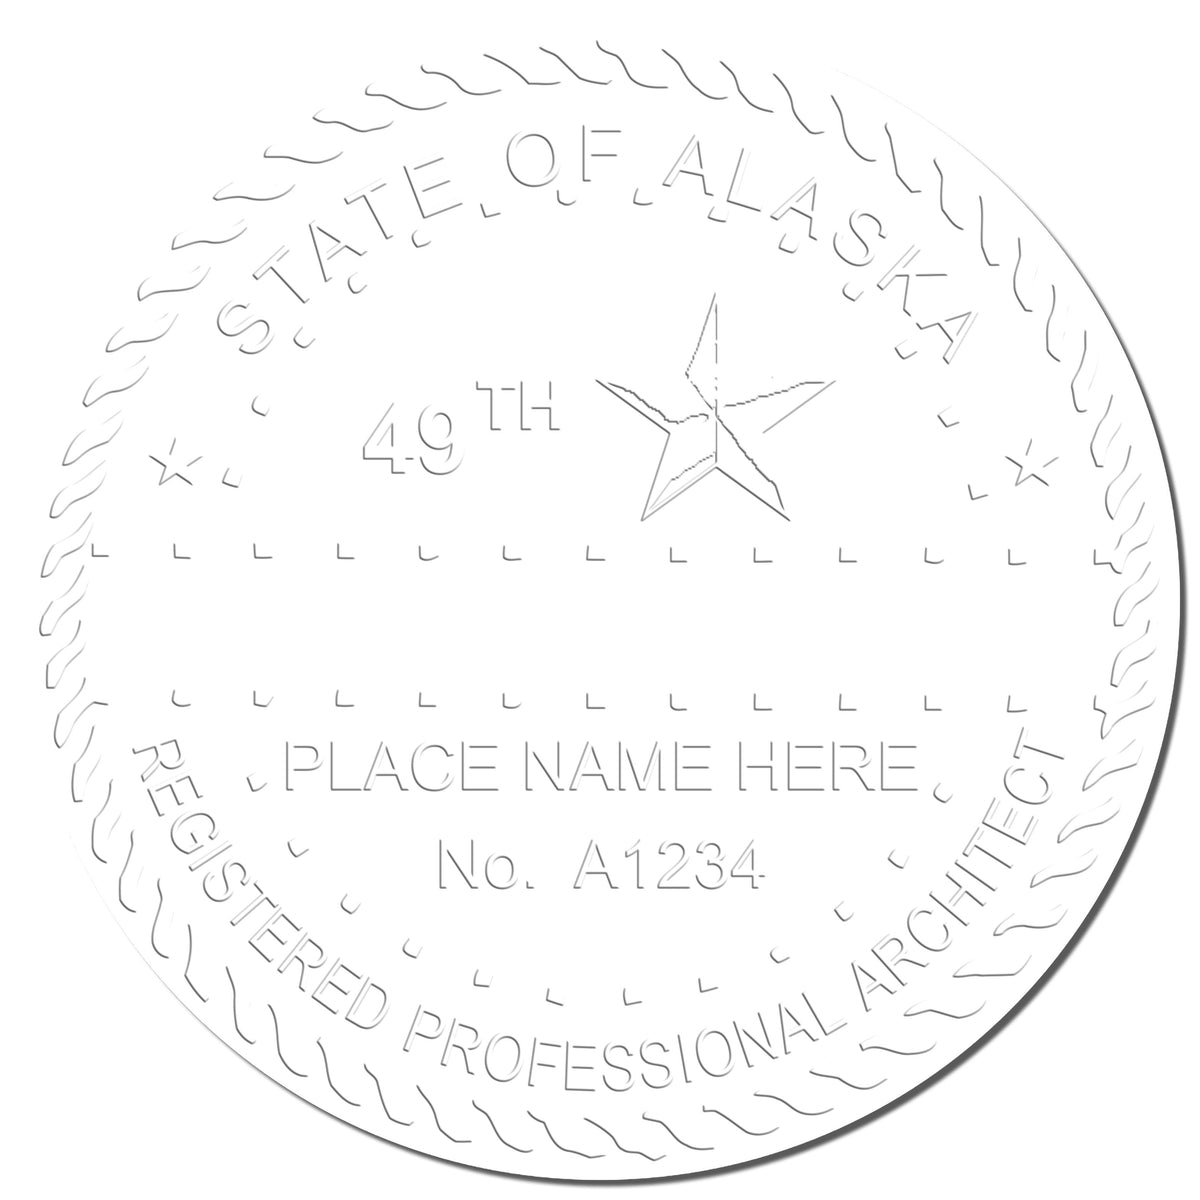 A photograph of the Alaska Desk Architect Embossing Seal stamp impression reveals a vivid, professional image of the on paper.